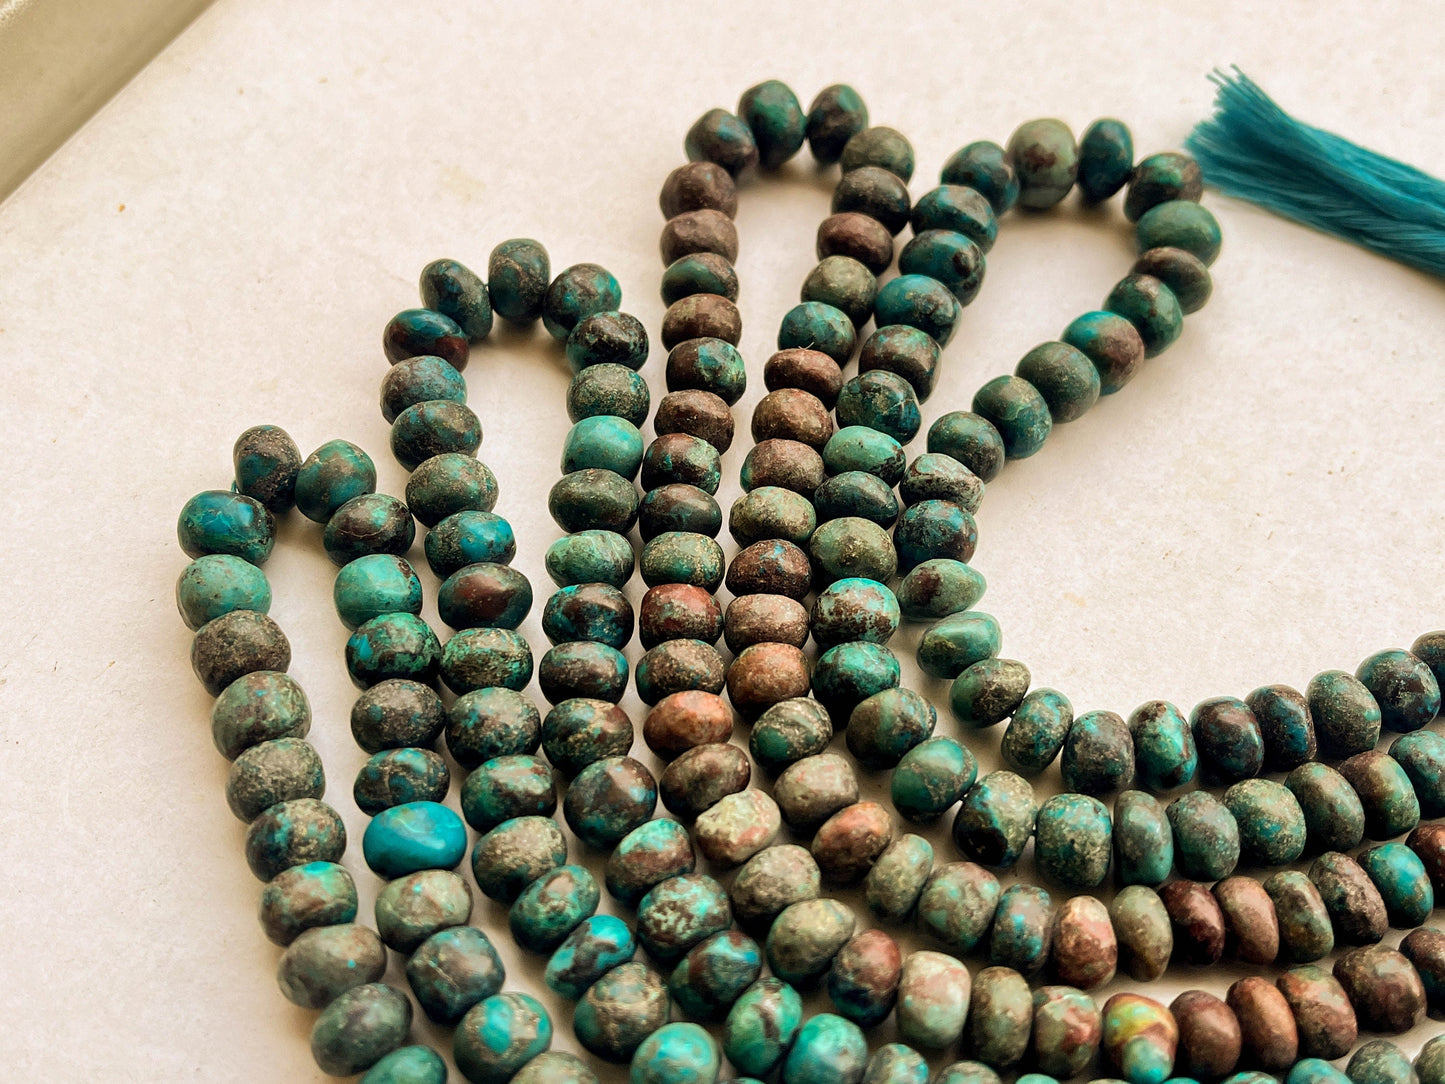 Chrysocolla Smooth Rondelle Shape Beads | 6MM to 9MM | 16 Inch Beadsforyourjewelry